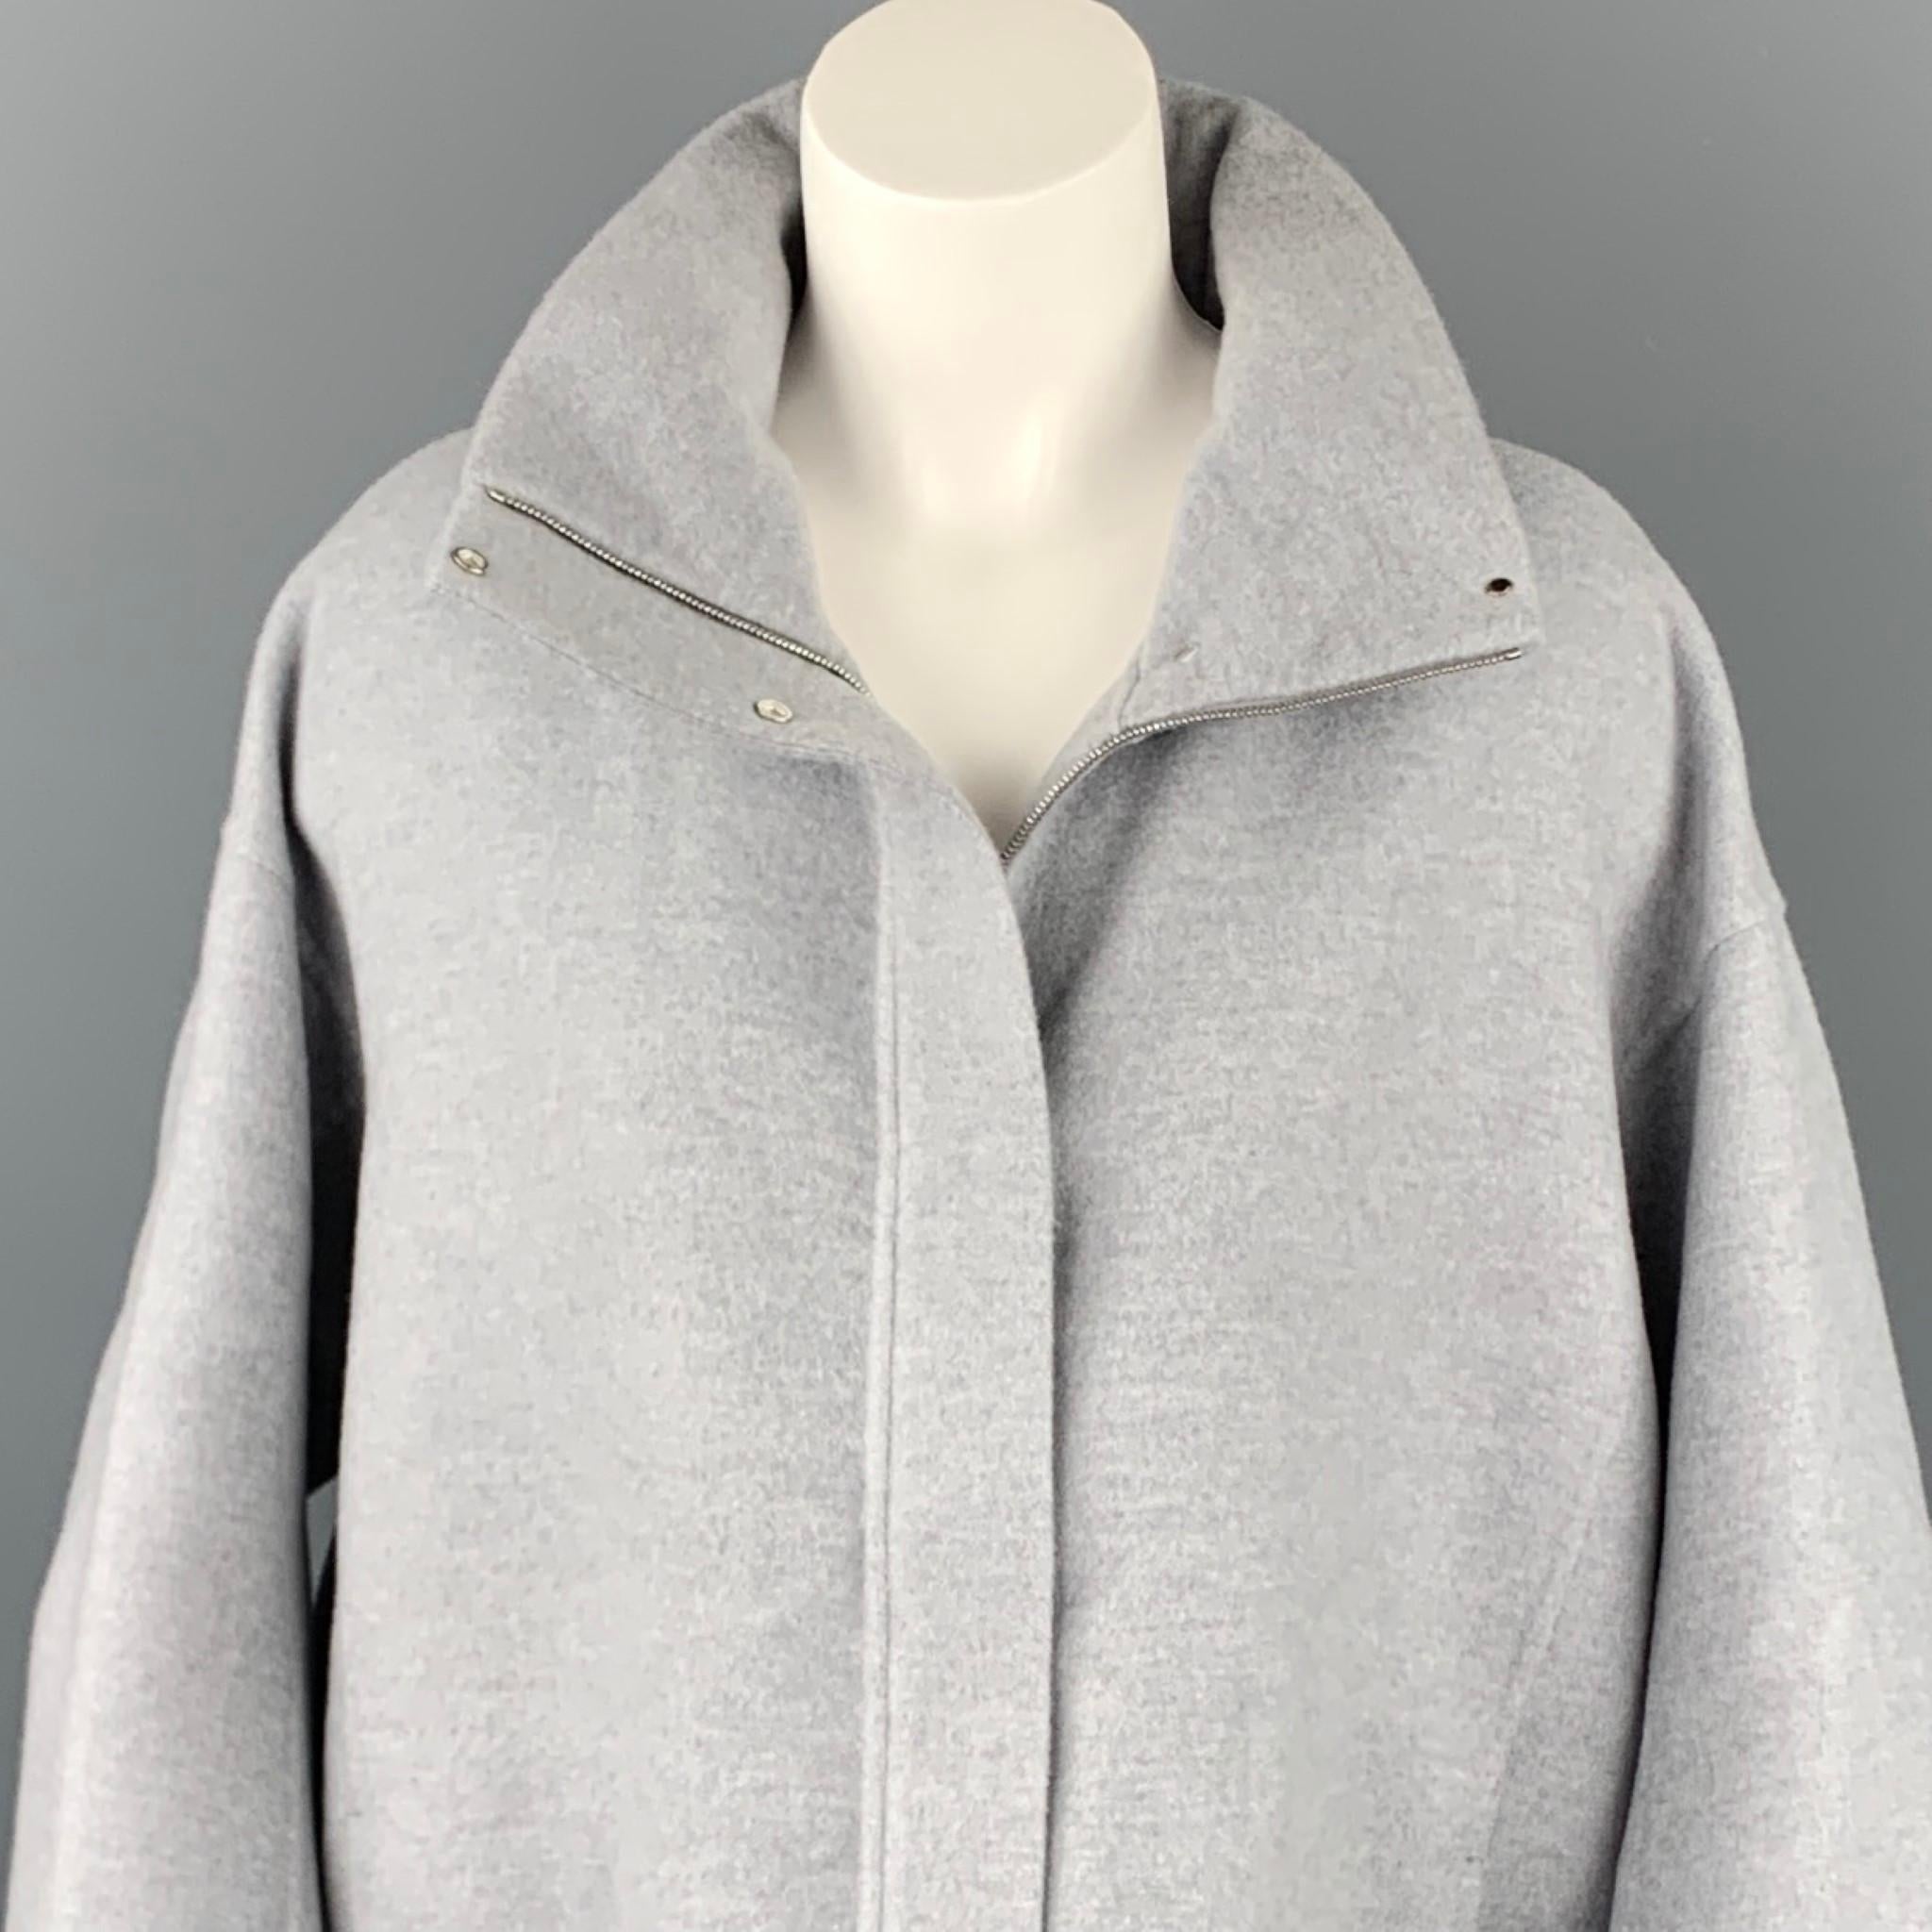 LORO PIANA jacket comes in a light gray cashmere with a leather trim featuring a removable hooded style, oversized, drawstring, slit pockets, and a zip & snap button closure. Made in Italy.

Excellent Pre-Owned Condition.
Marked: